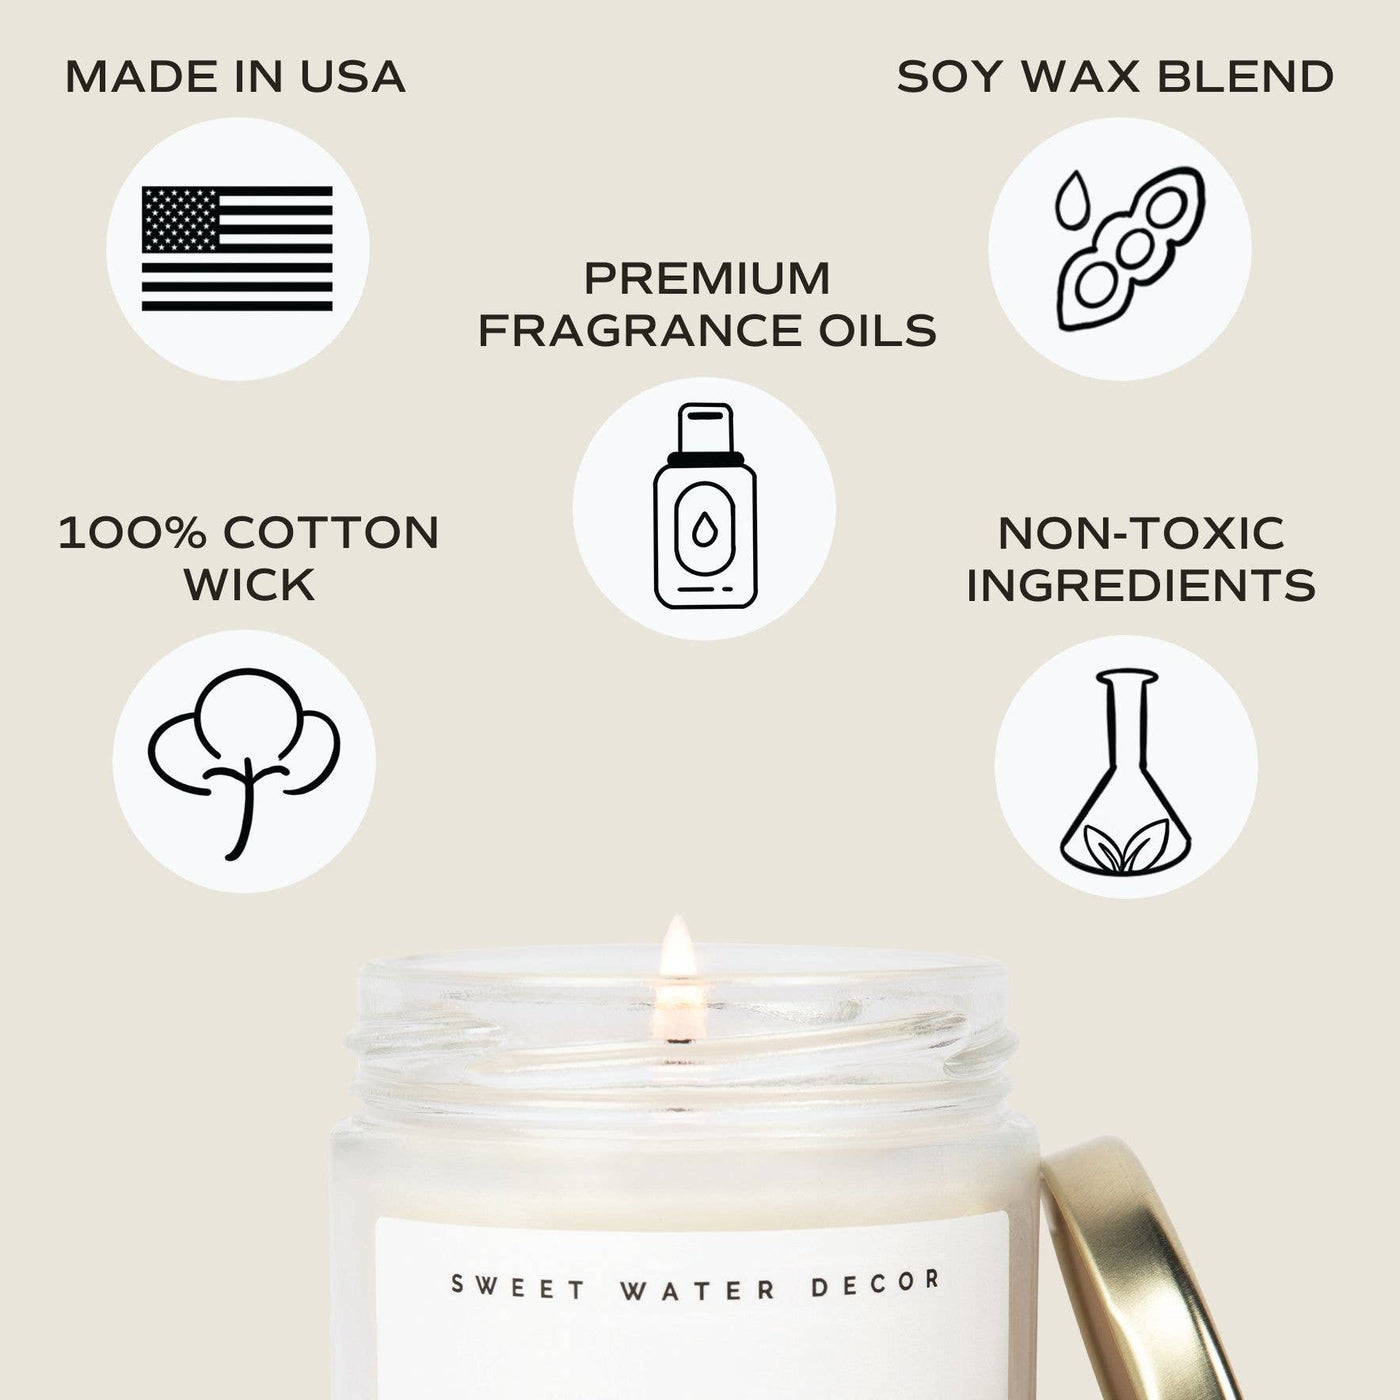 SPA DAY SOY CANDLE